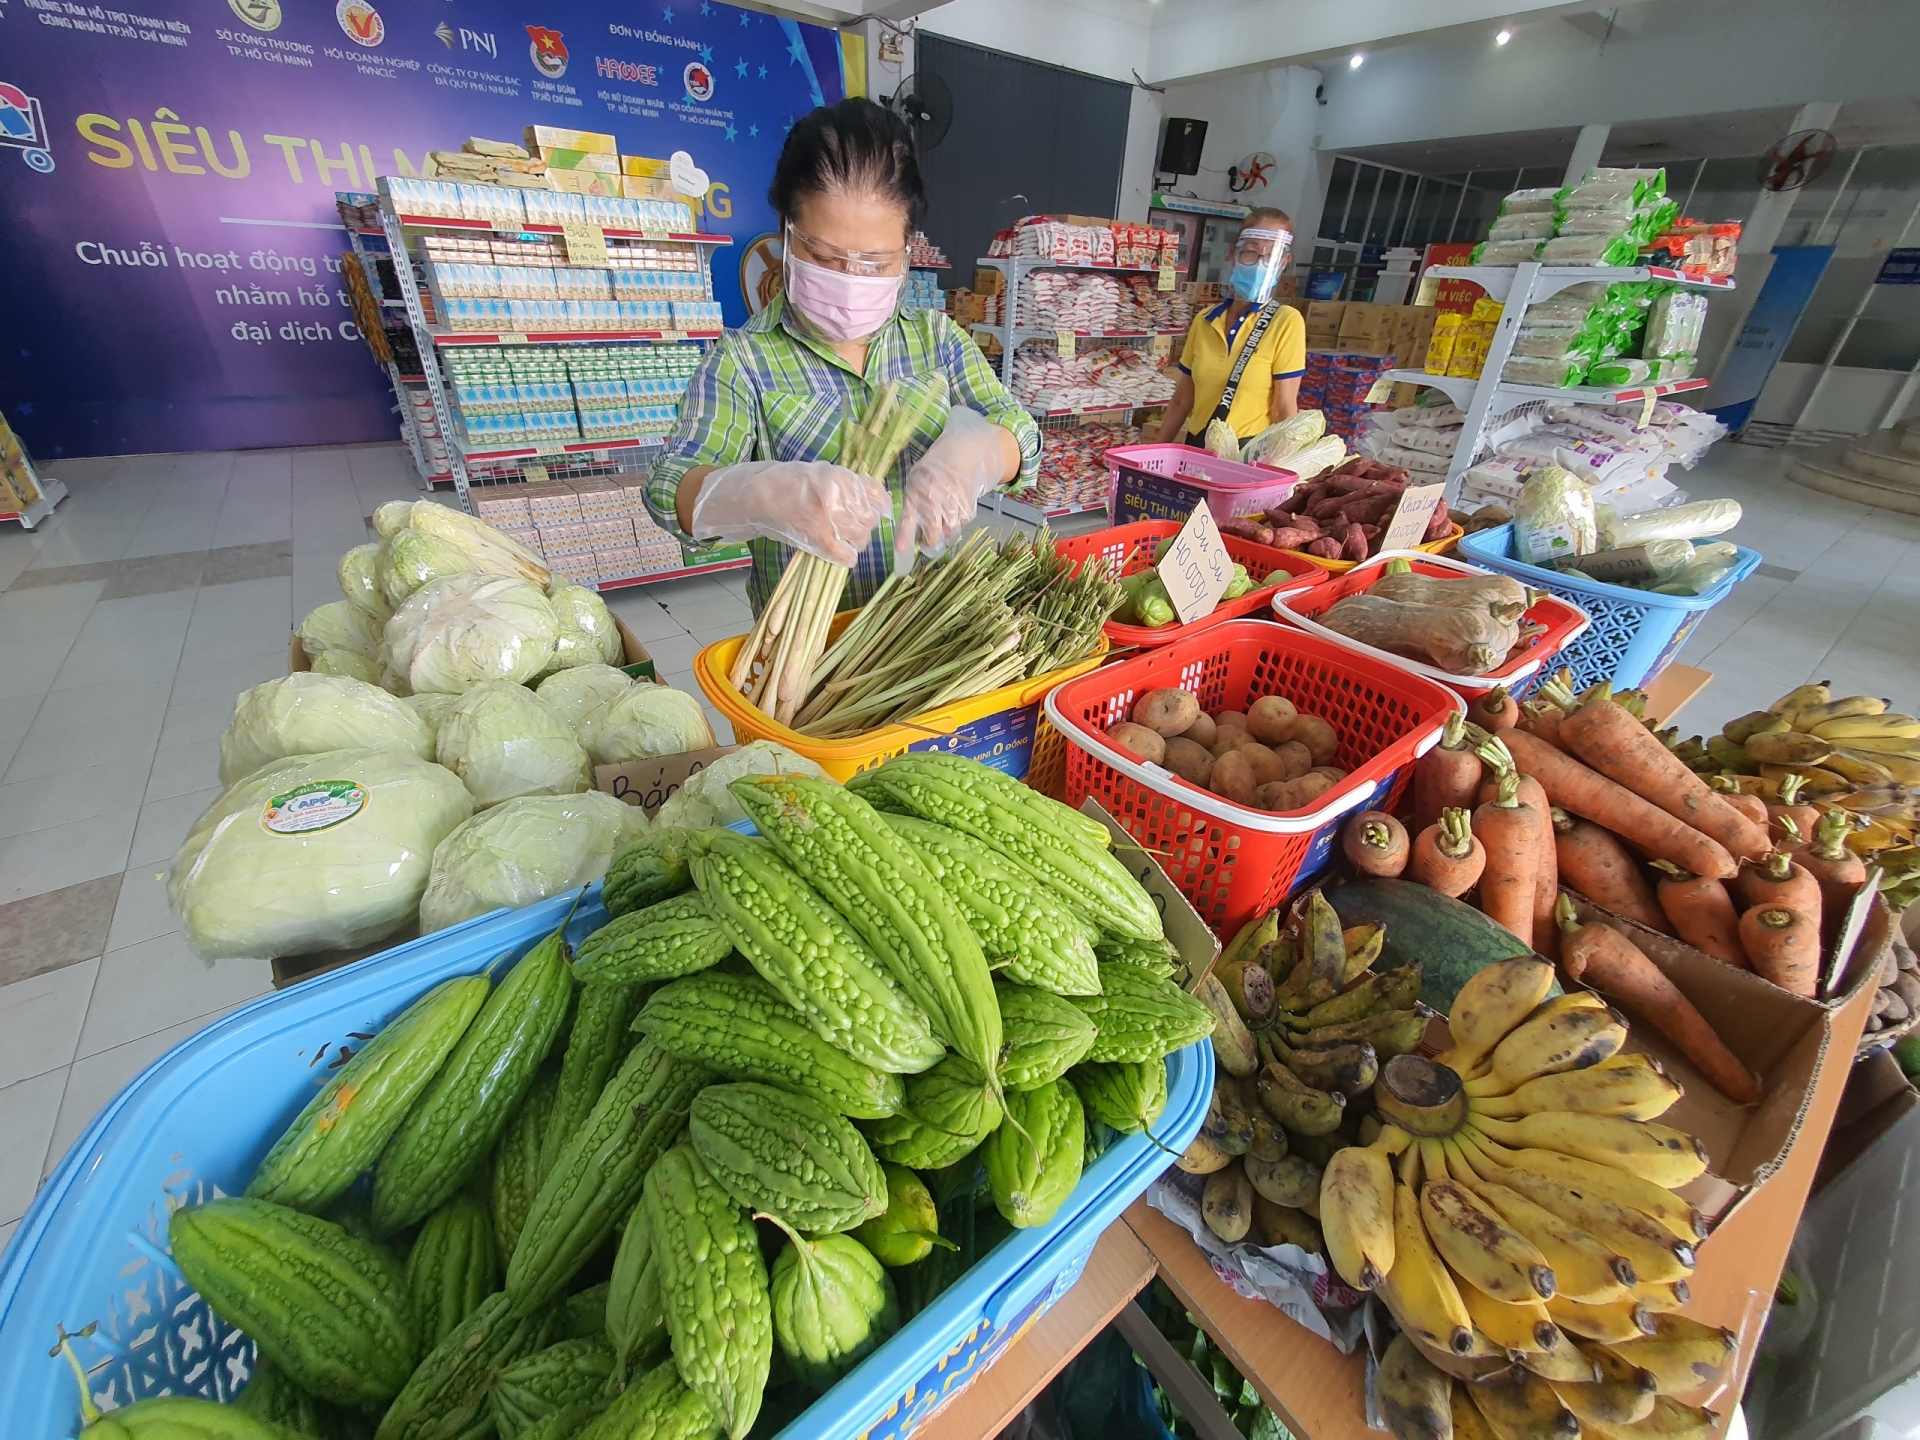 Zero dong supermarkets opened to support the needy in Ho Chi Minh City